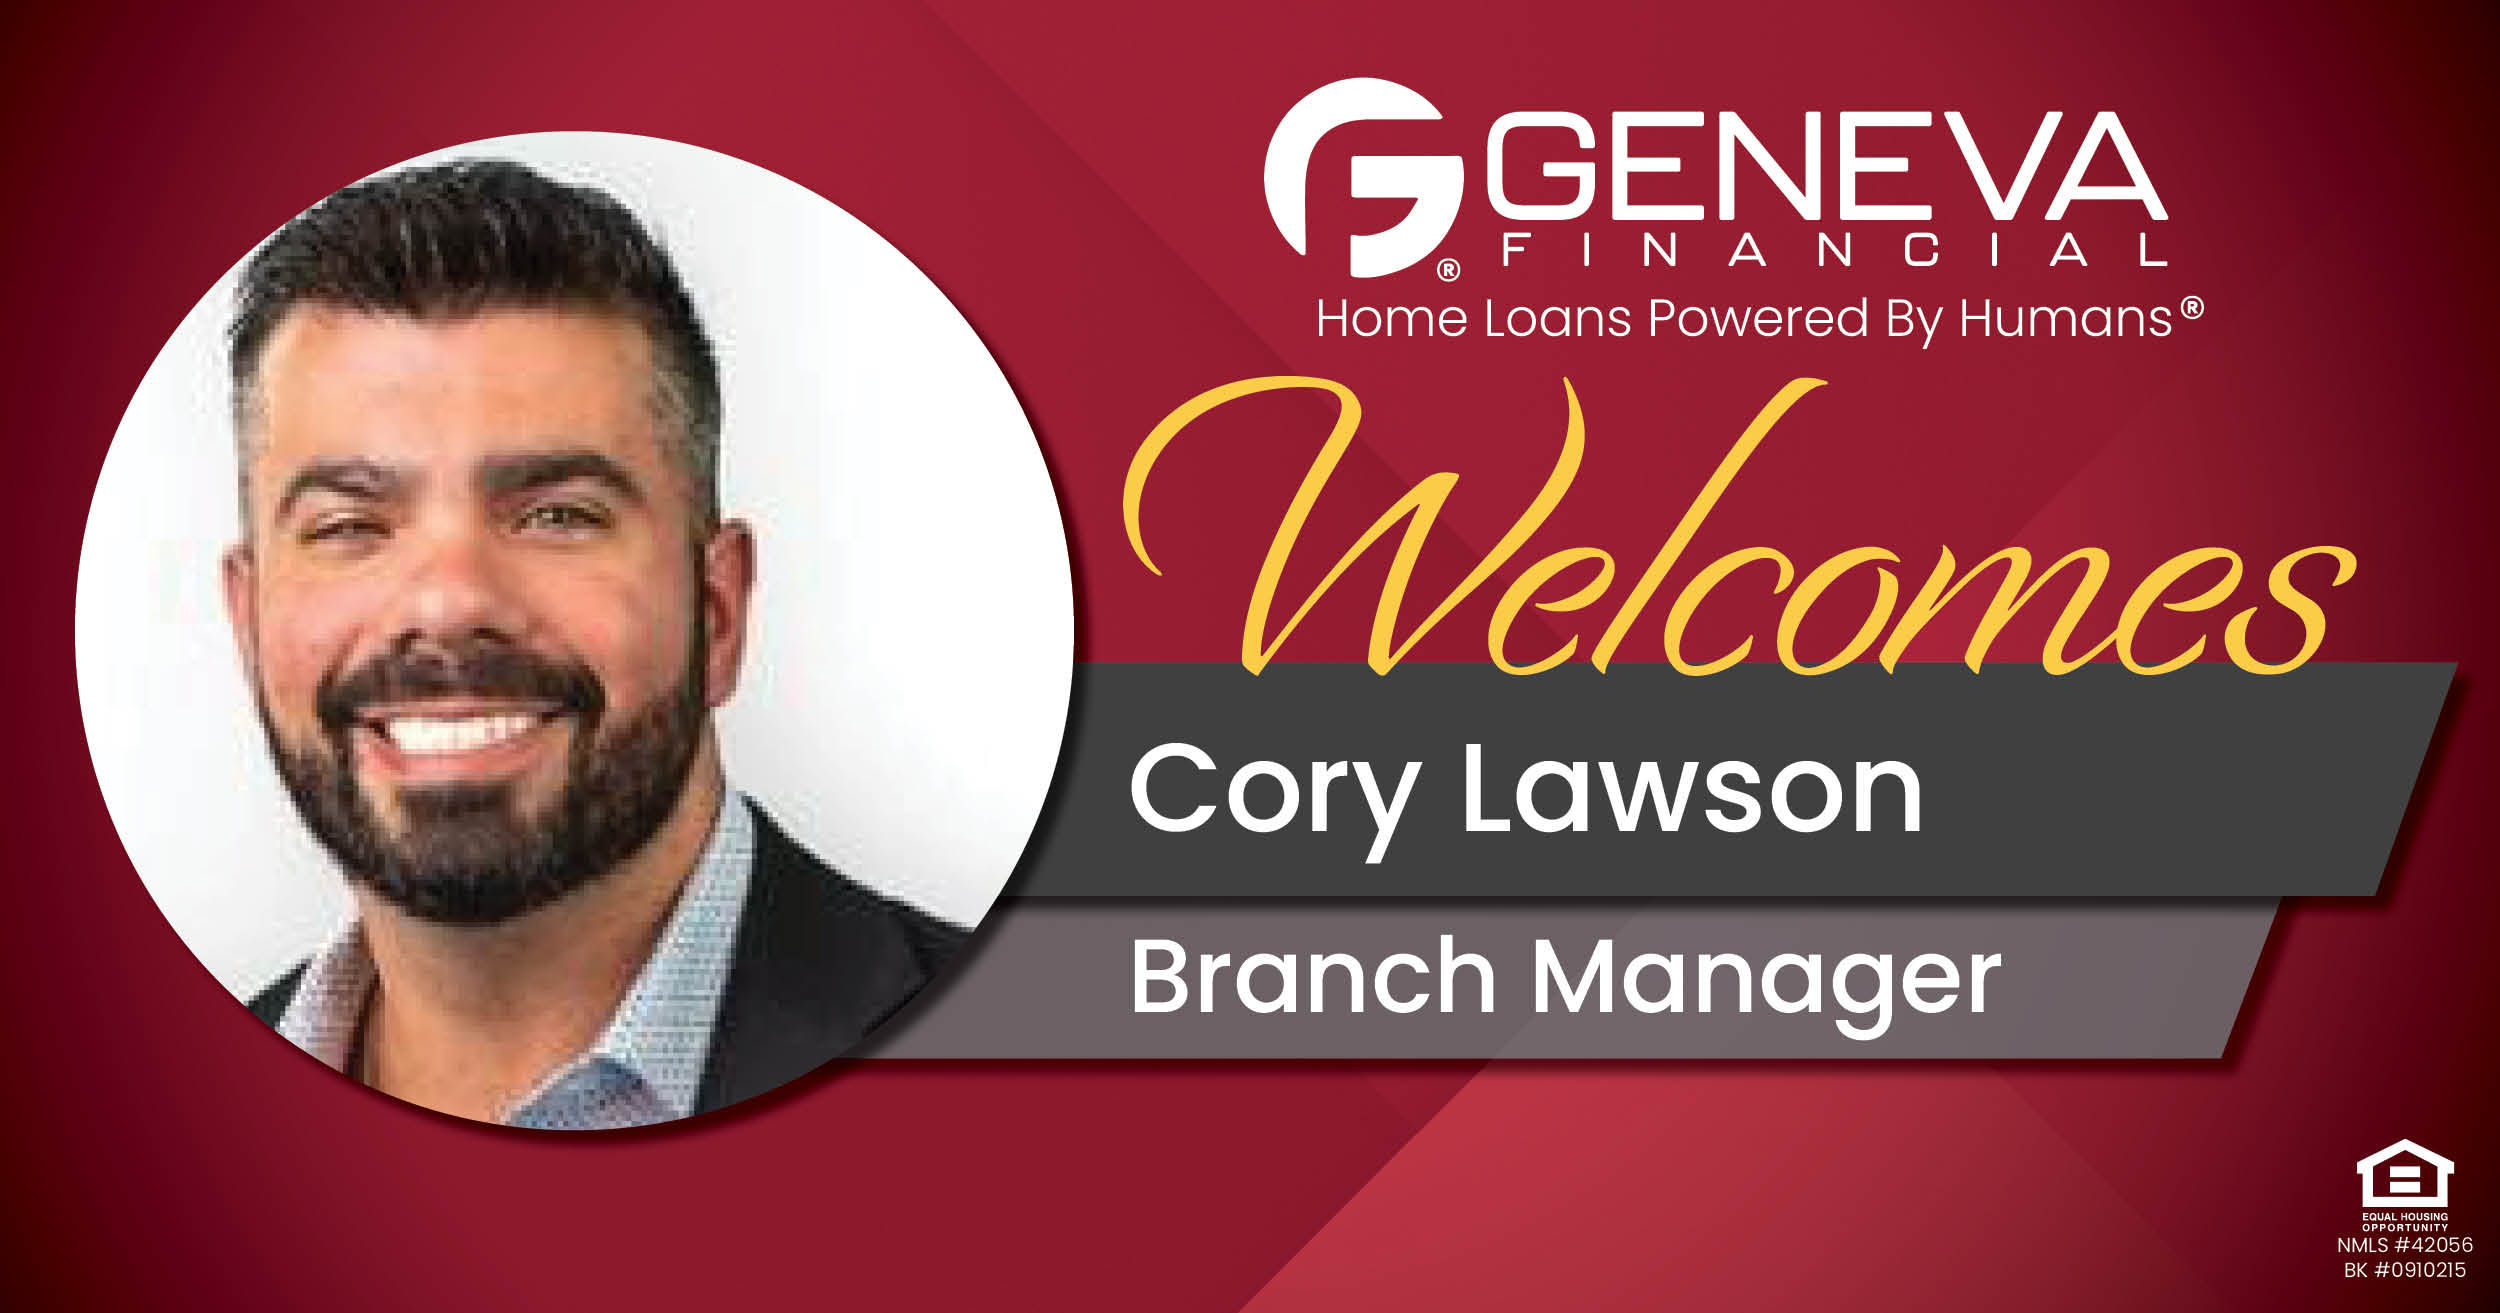 Geneva Financial Welcomes New Branch Manager Cory Lawson to Columbus, Ohio – Home Loans Powered by Humans®.